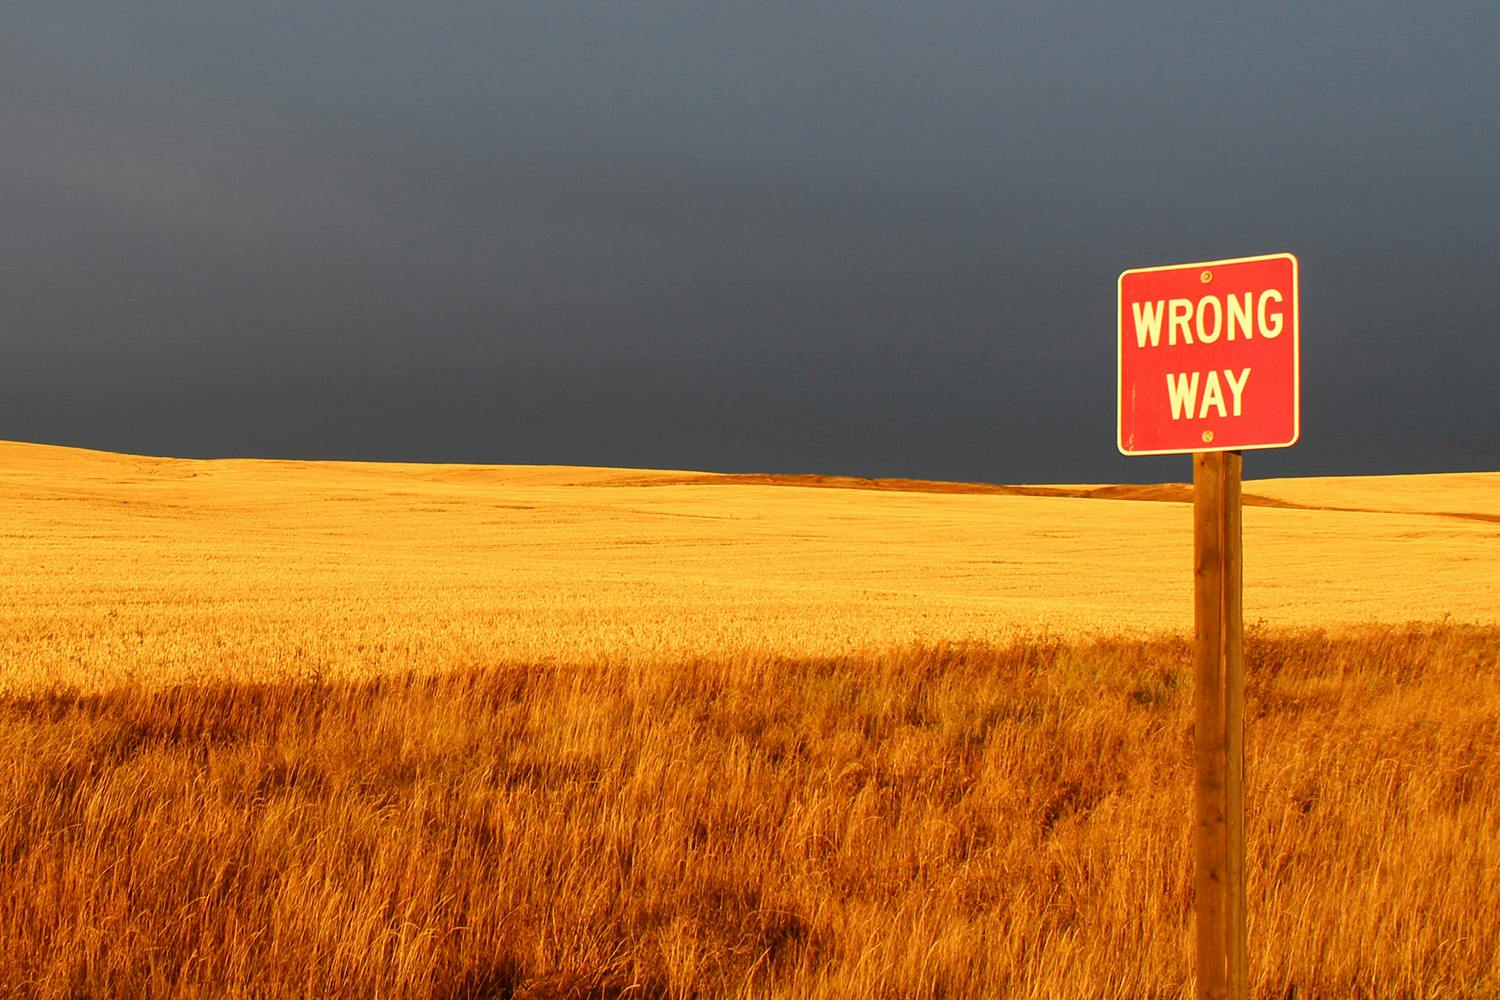 Photo of a "wrong way" sign in a field of wheat.